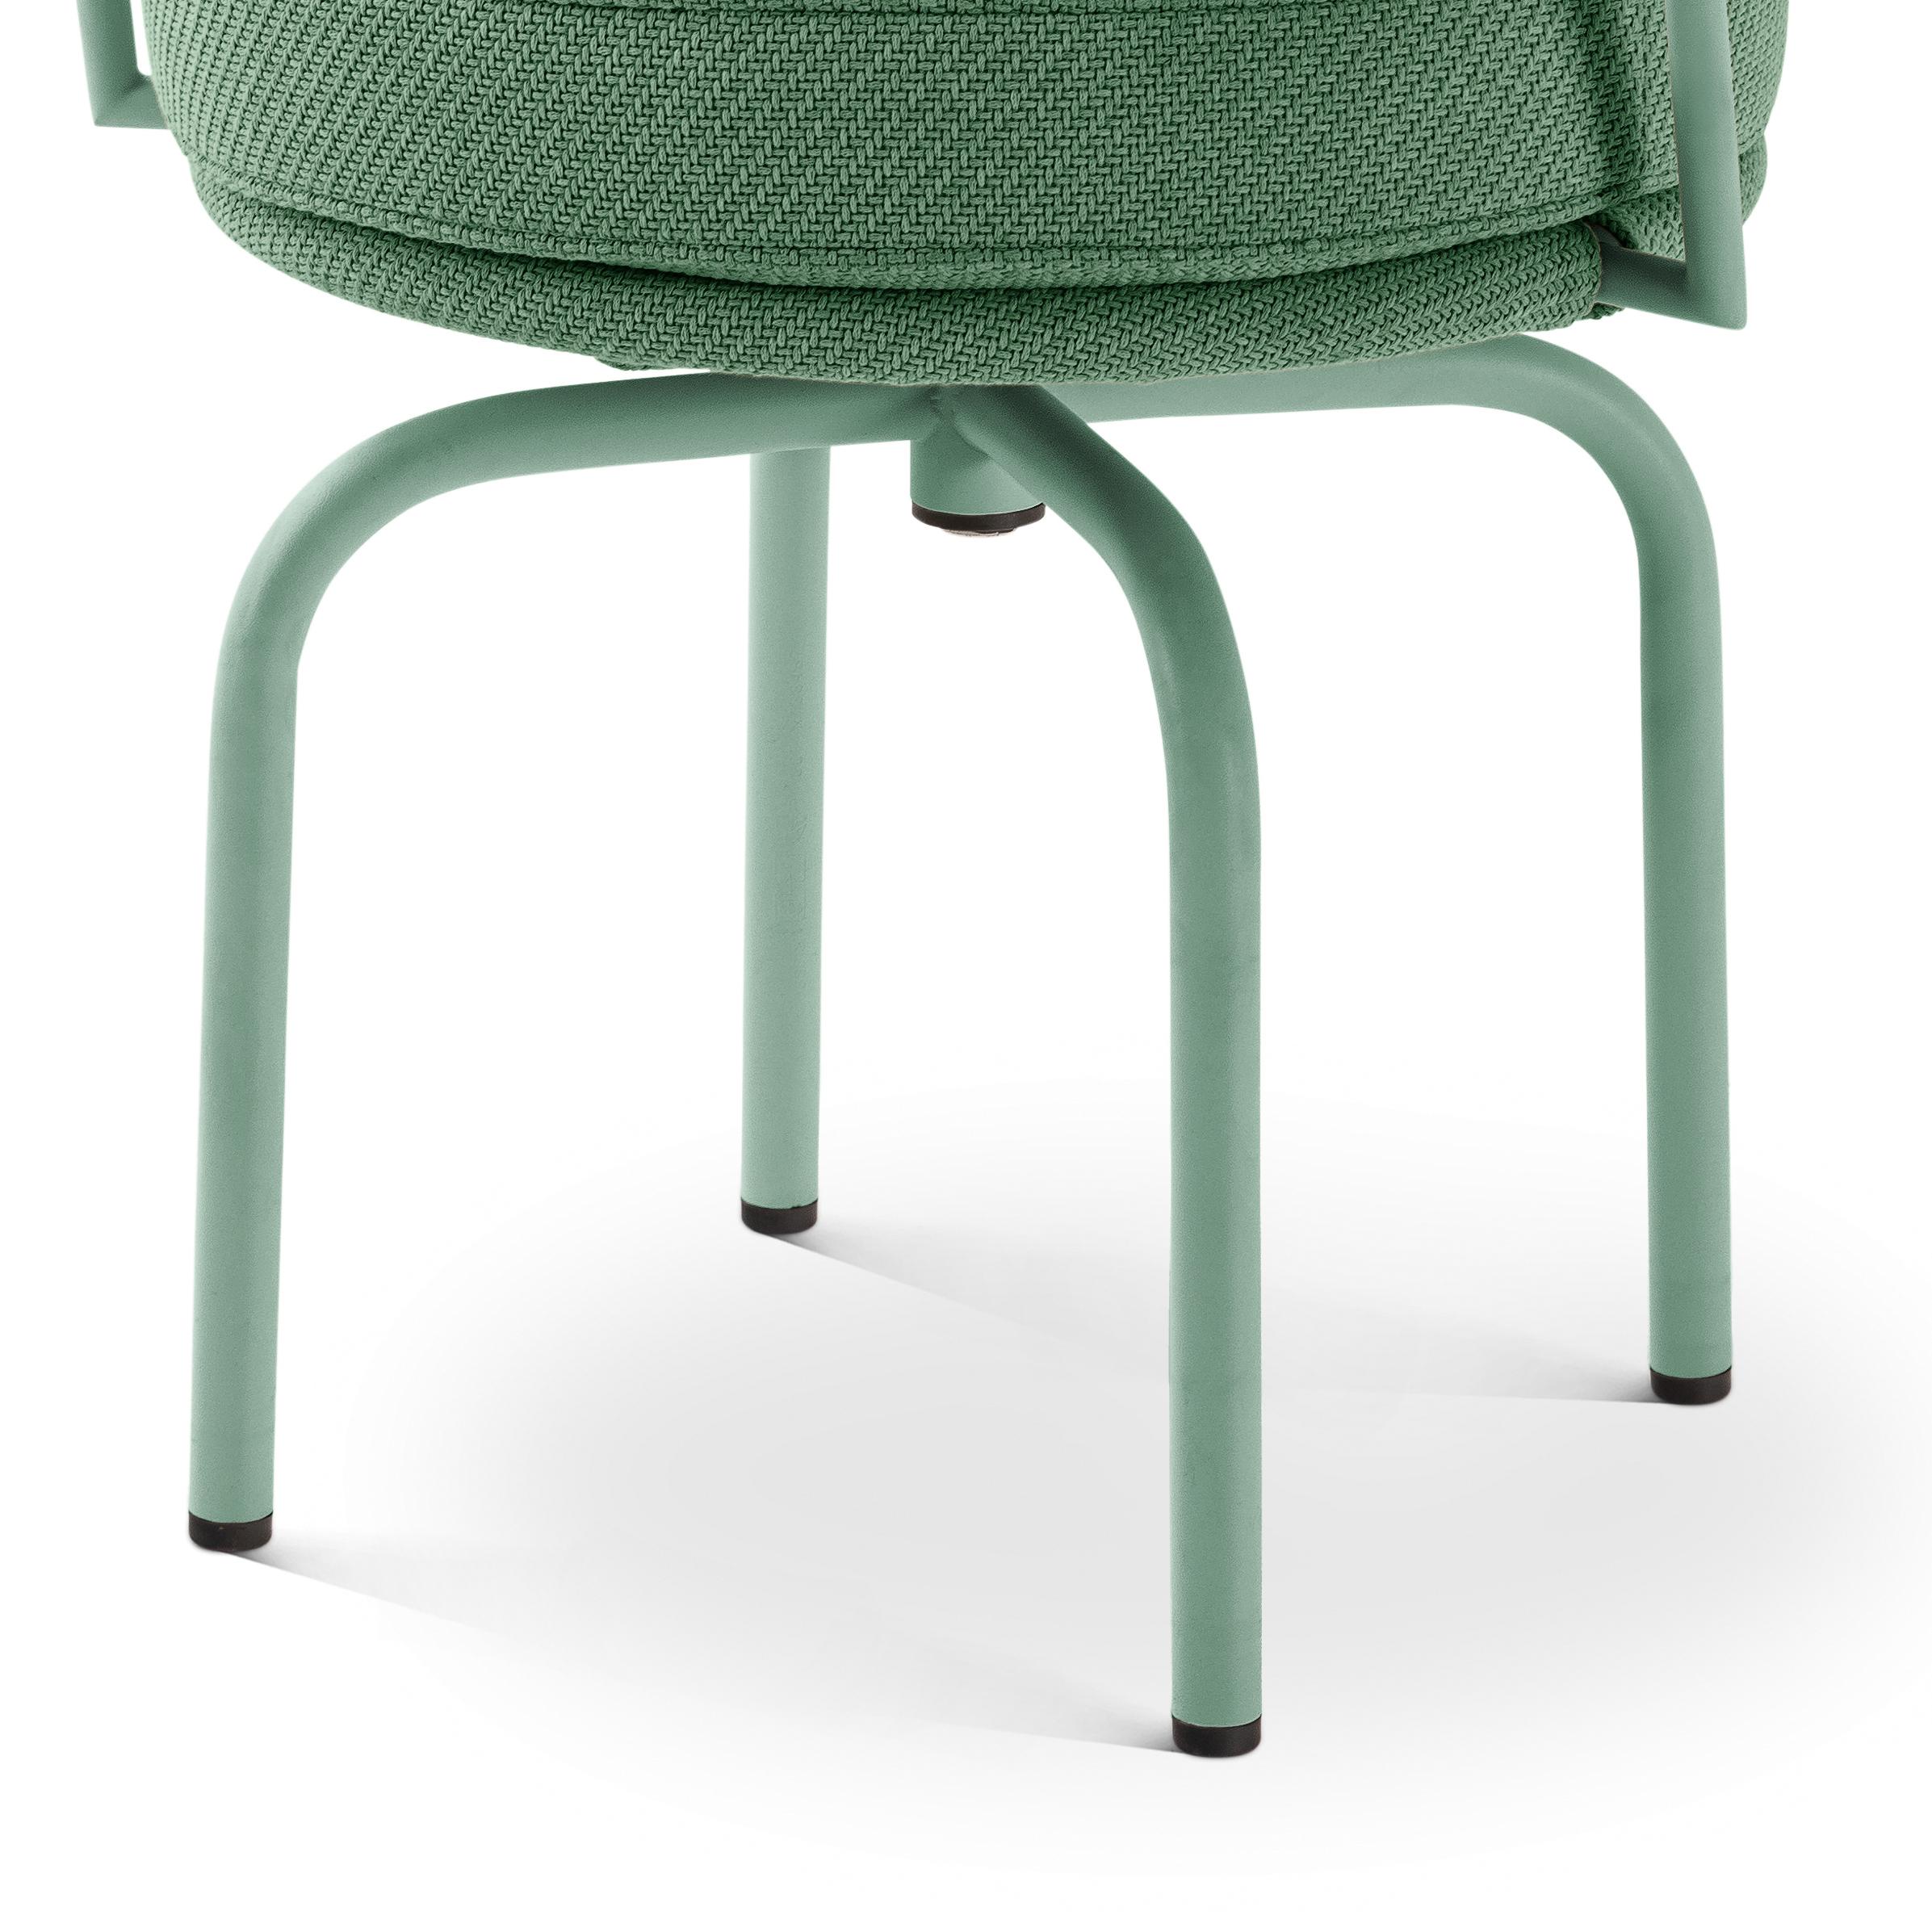 Outdoors green LC7 chair designed by Charlotte Perriand in 1927. Relaunched in 1978.
Manufactured by Cassina in Italy.

Designed by Charlotte Perriand and part of the LC collection by Le Corbusier, Pierre Jeanneret and Charlotte Perriand.

An icon